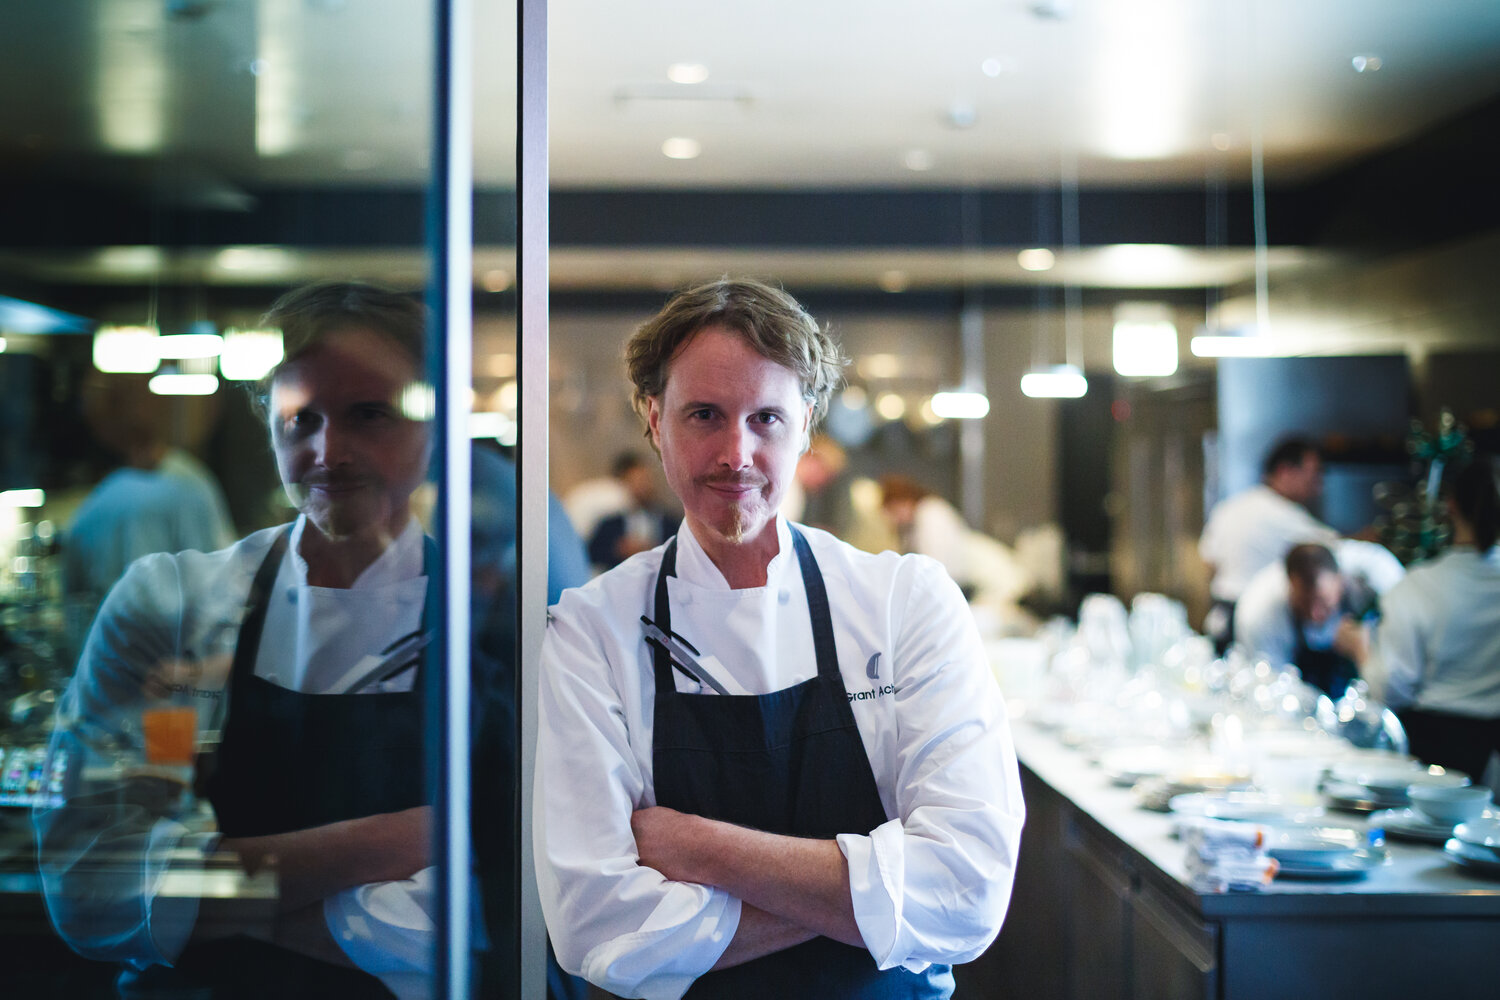 The Aviary Apron — The Alinea Group Store